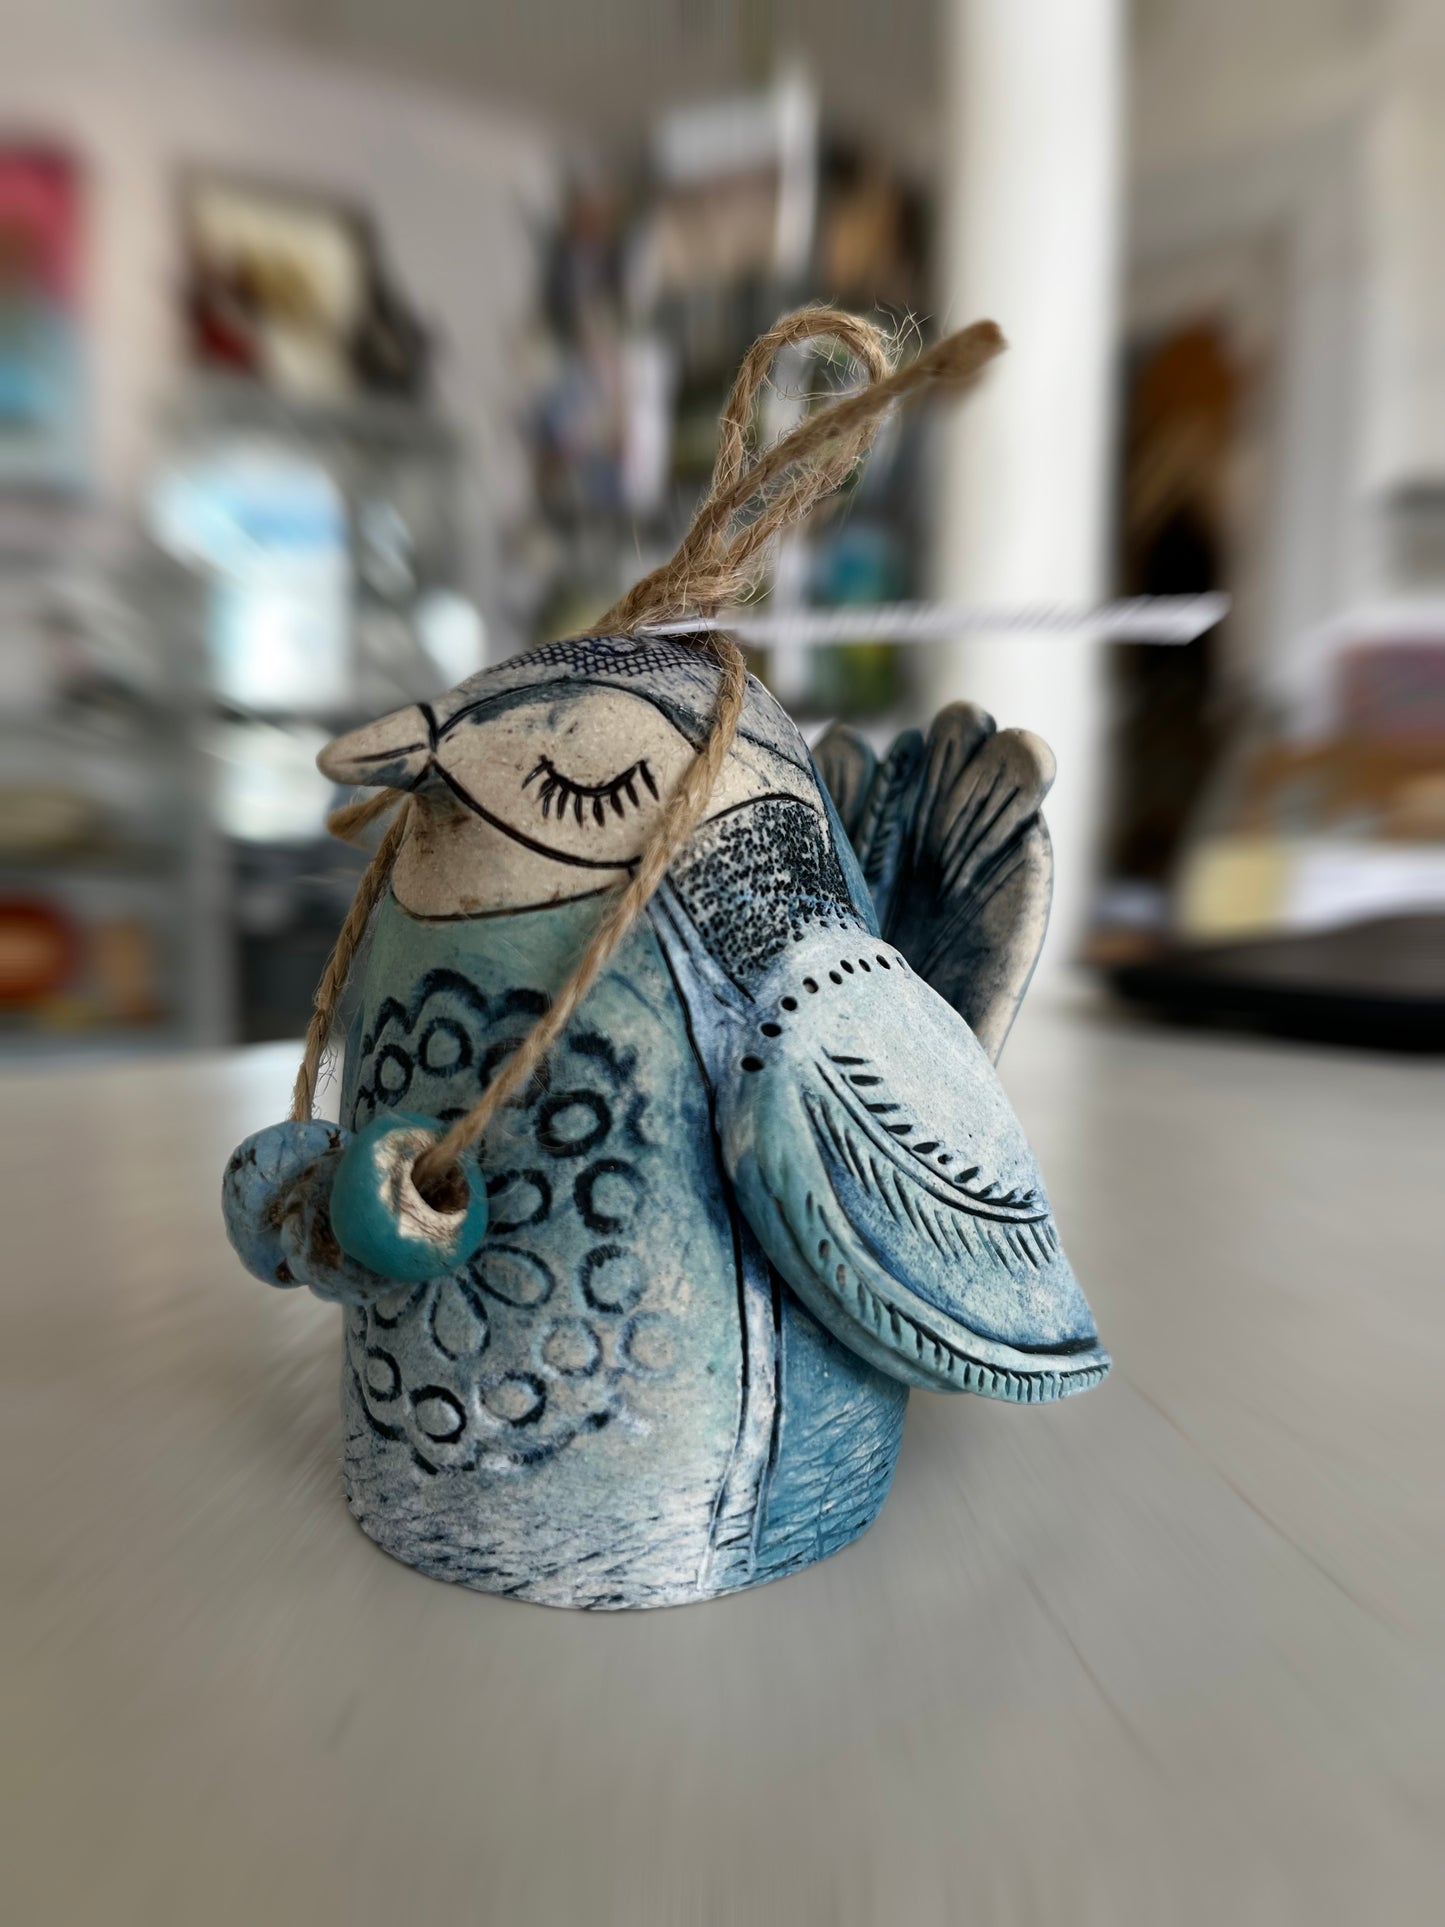 Marika Du Plessis- Small ceramic blue bird with lace details